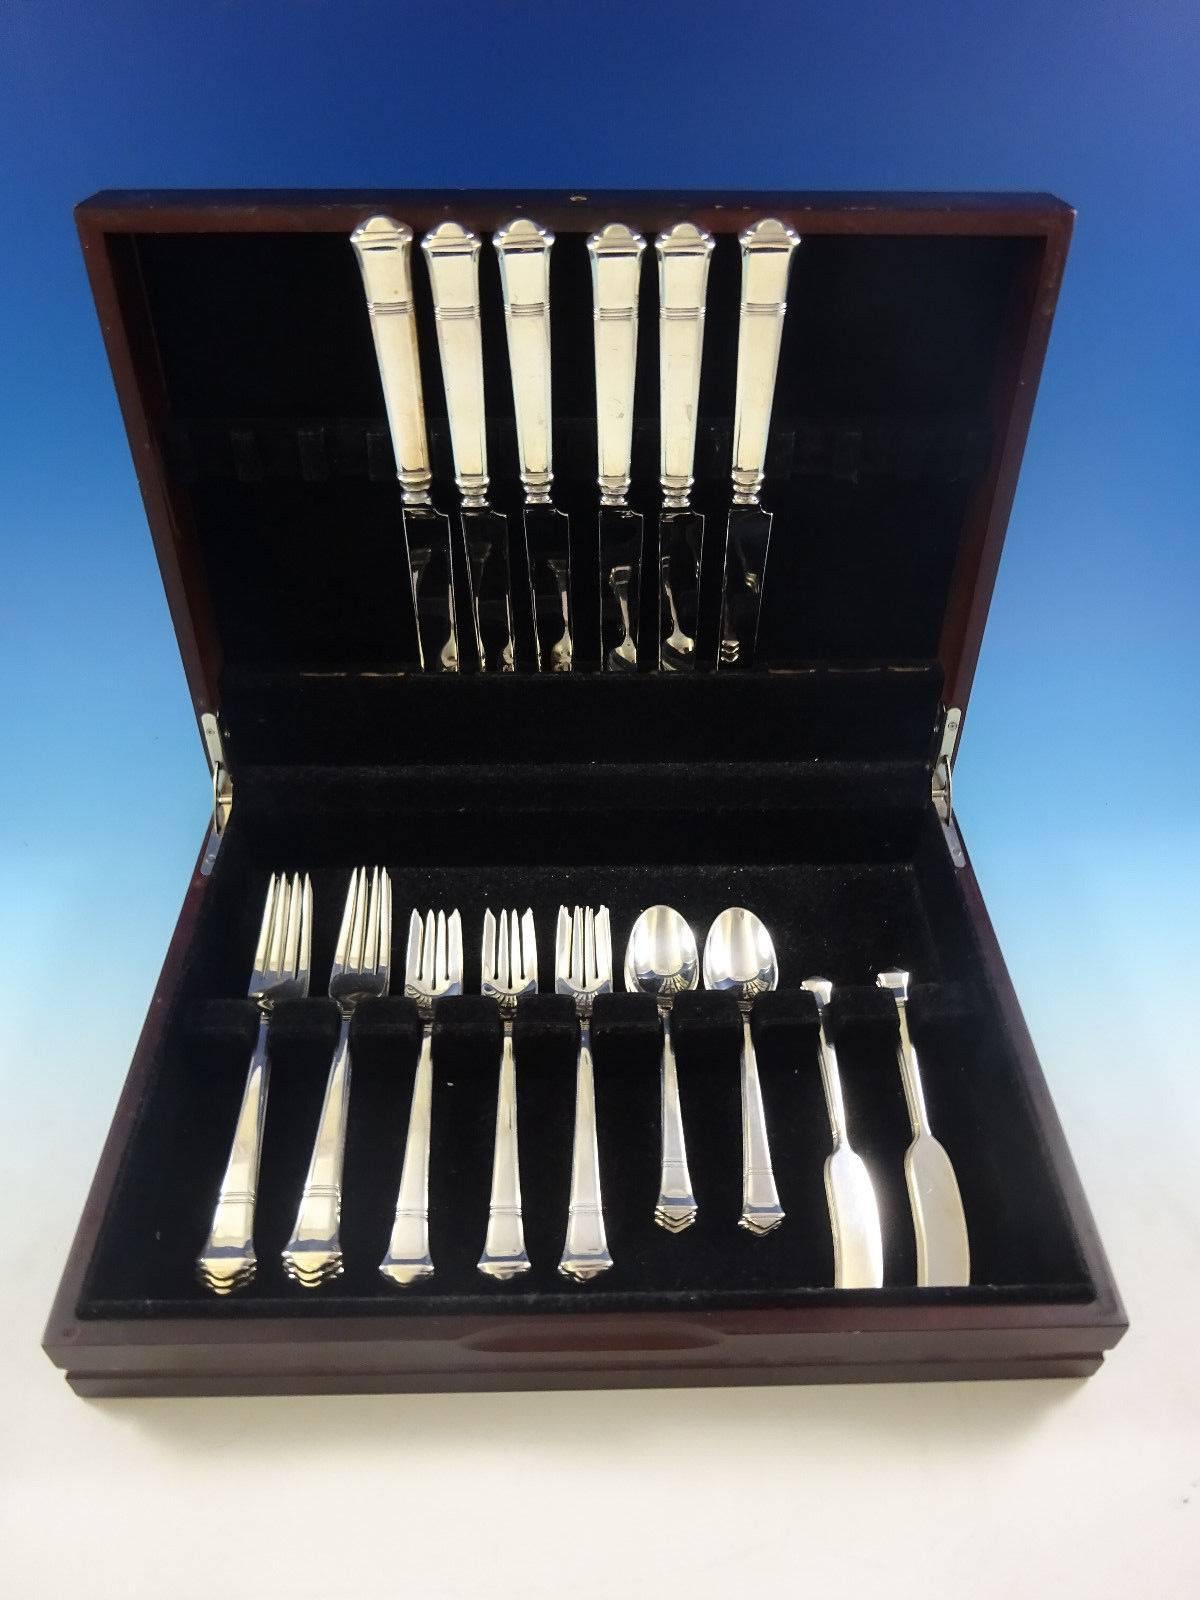 Dinner size Windham by Tiffany & Co. sterling silver flatware set of 30 pieces. This set includes: Six dinner size knives, 10 1/2